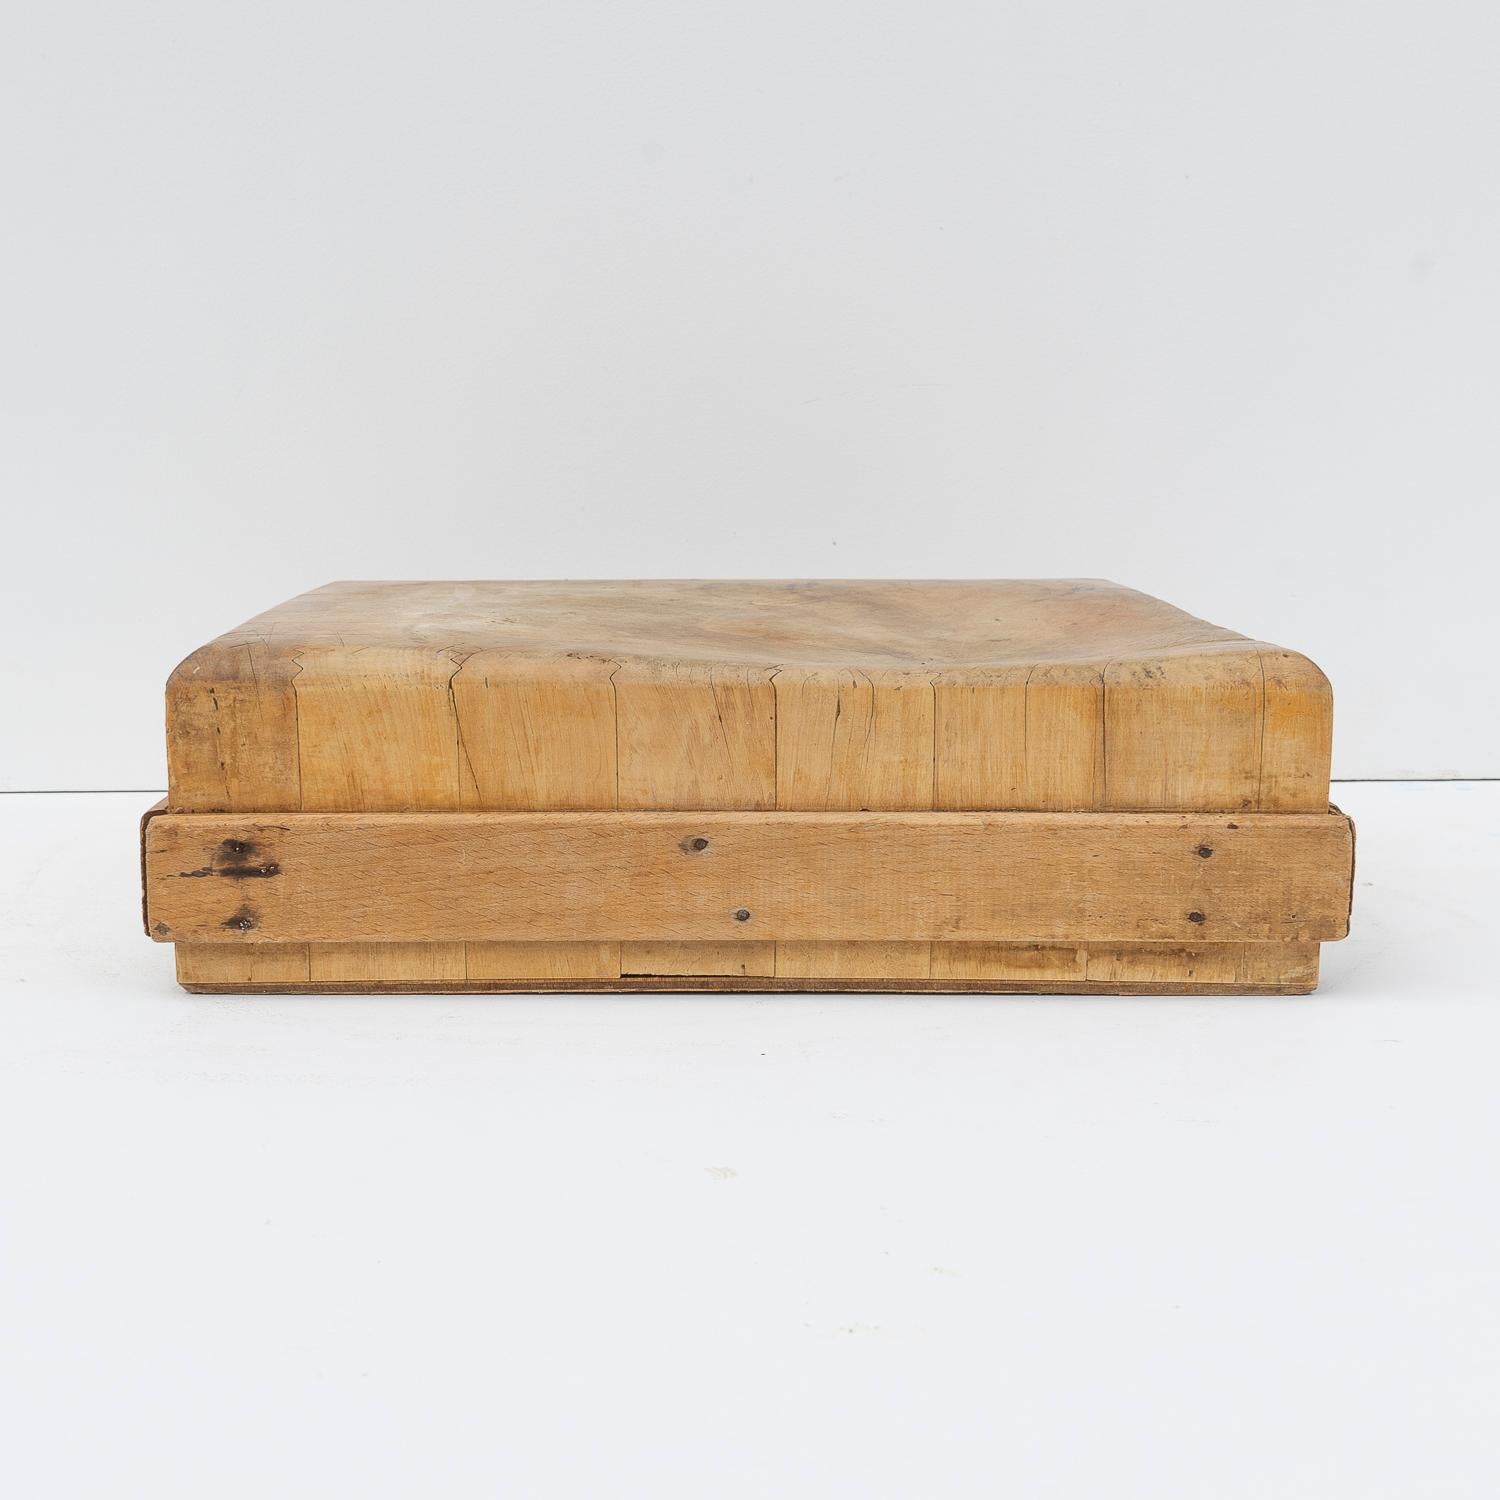 Vintage Wooden End Grain Butchers Block Chopping Board, Early-Mid 20th Century 3